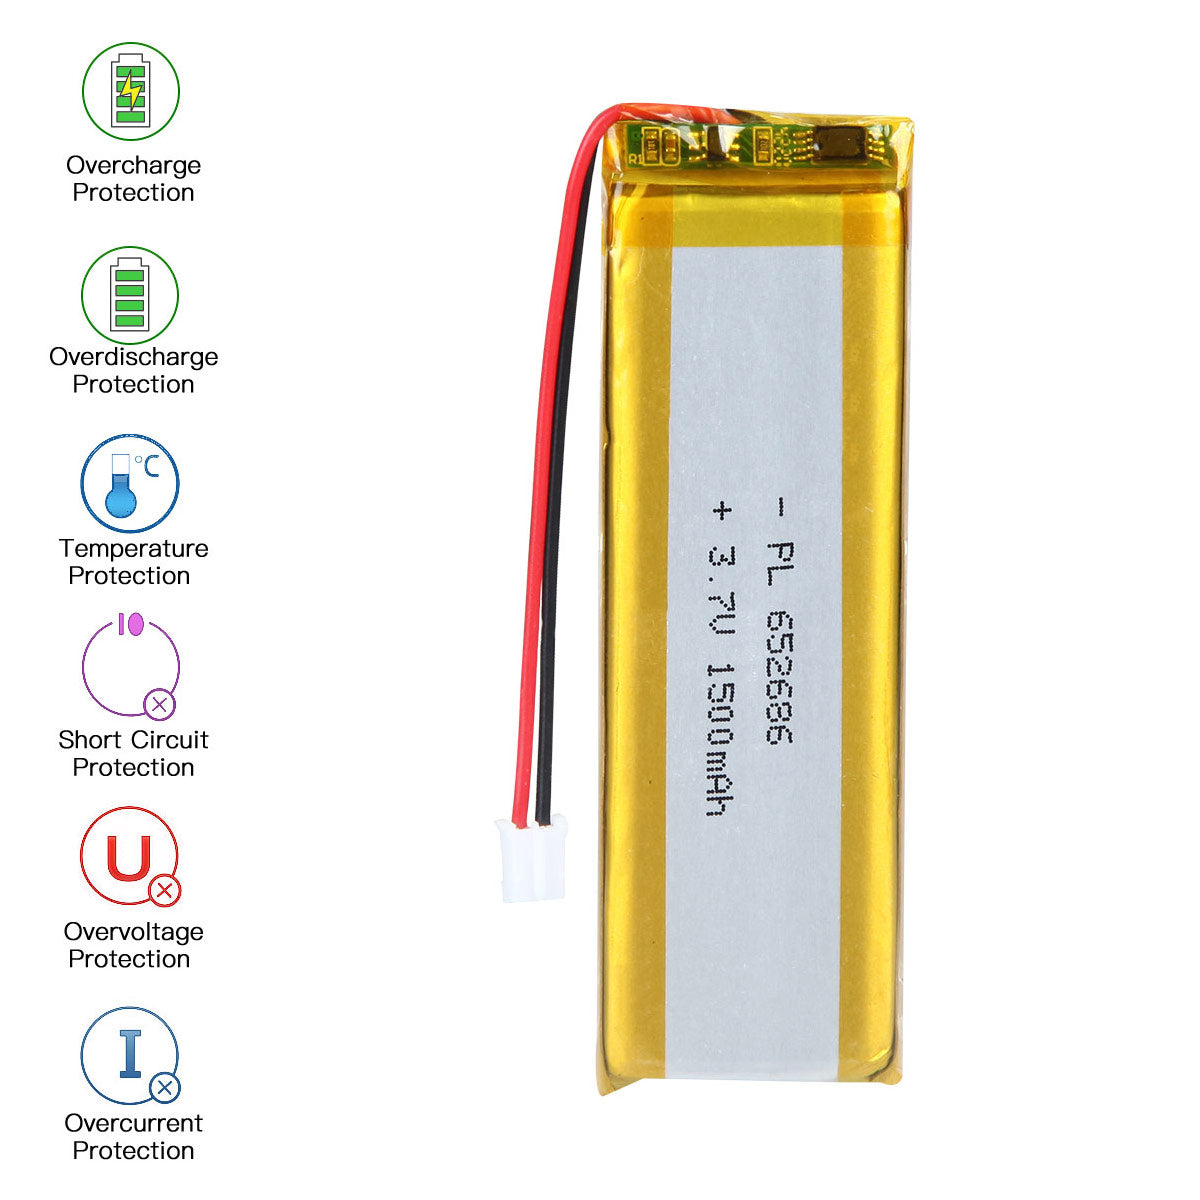 3.7V 1500mAh 652686 Rechargeable Lithium Polymer Battery